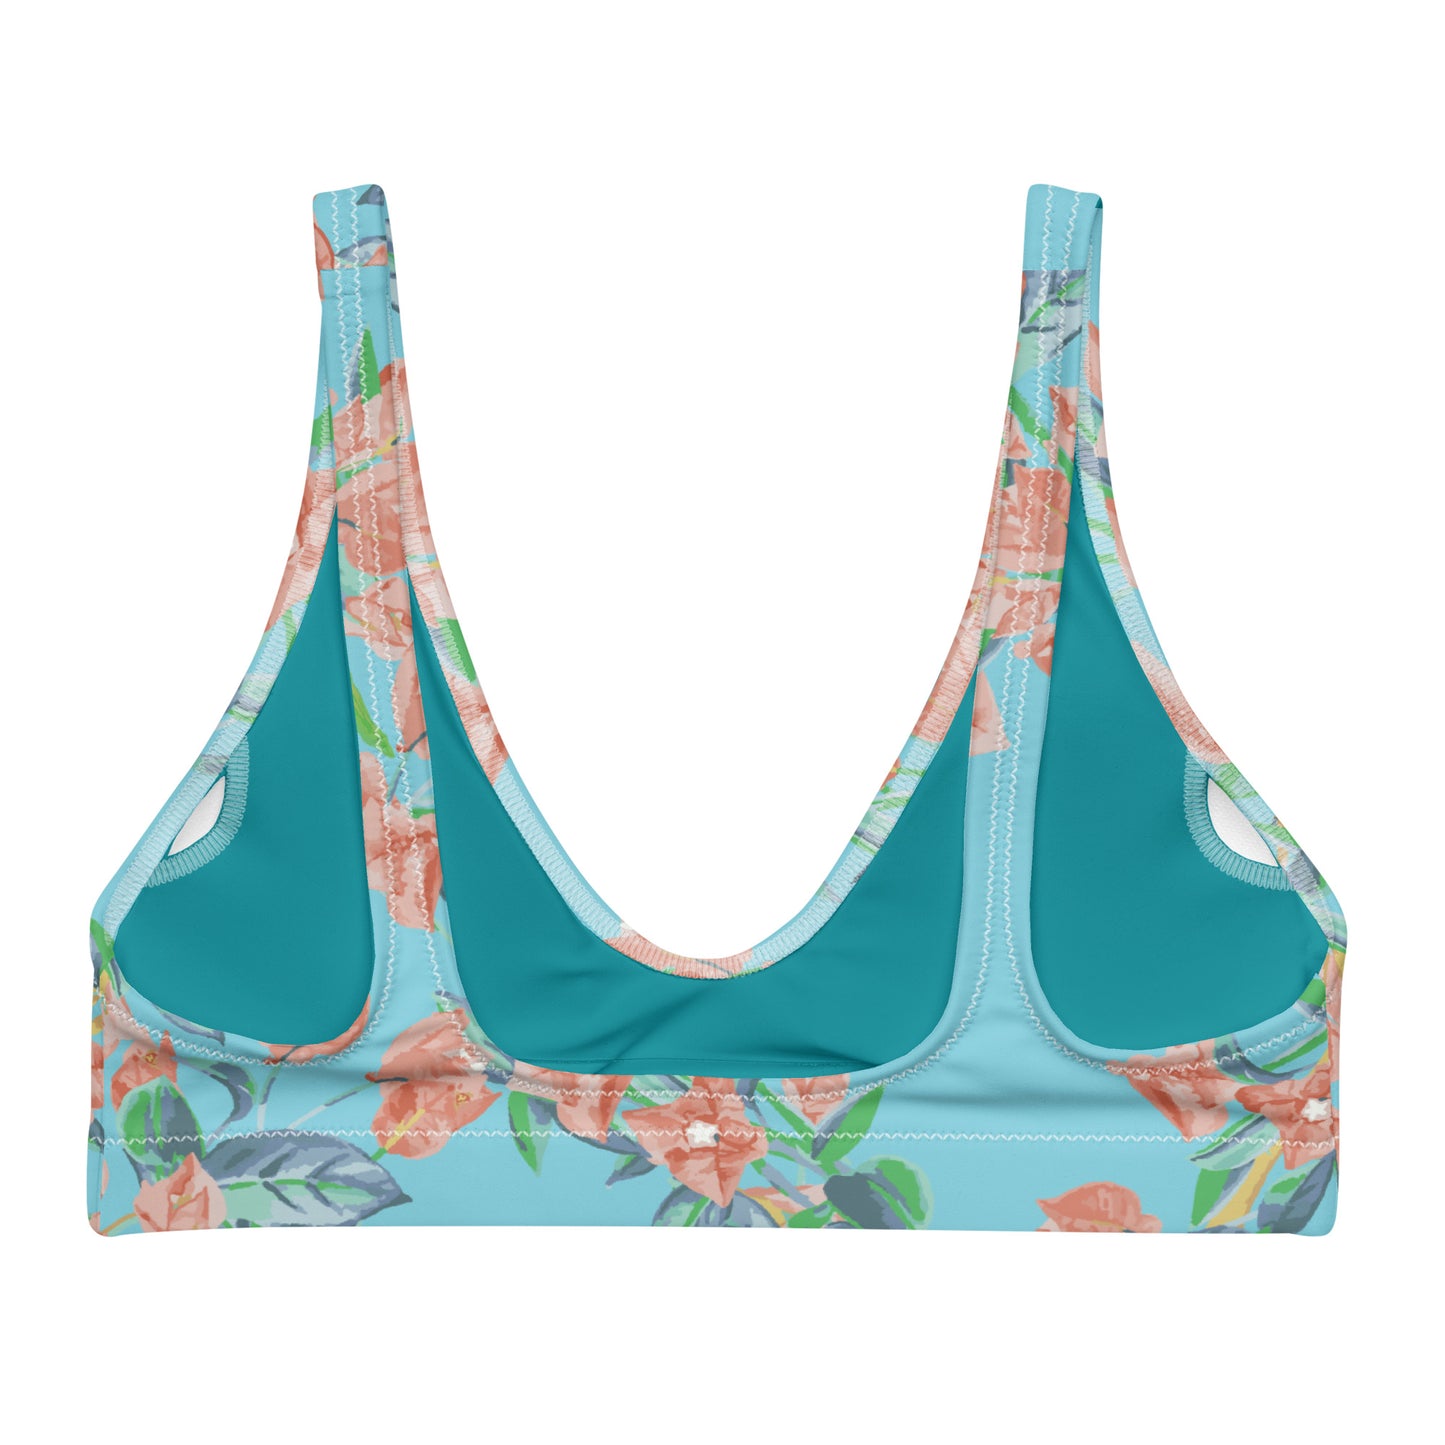 Bougainvillea Springs Sky Blue and Coral Recycled Scoop Bikini Top